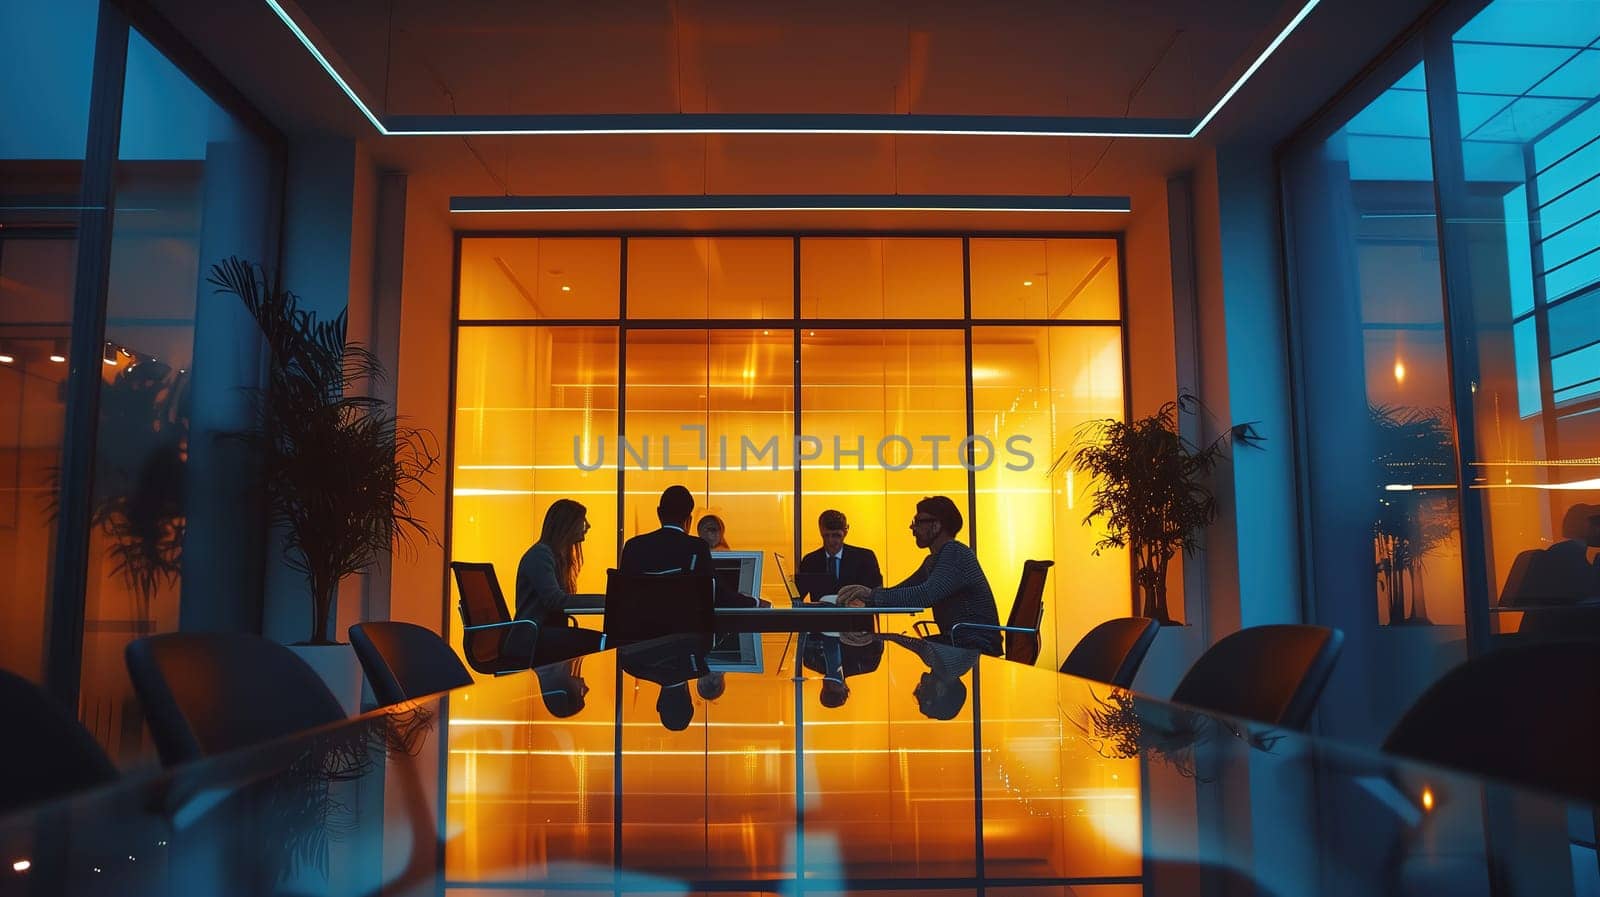 The setting sun casts a warm glow on a team of professionals engaged in a business meeting inside a contemporary office boardroom. The silhouette of the city skyline is visible through the large windows, adding a dynamic backdrop to the collaborative discussion taking place at the end of the workday.